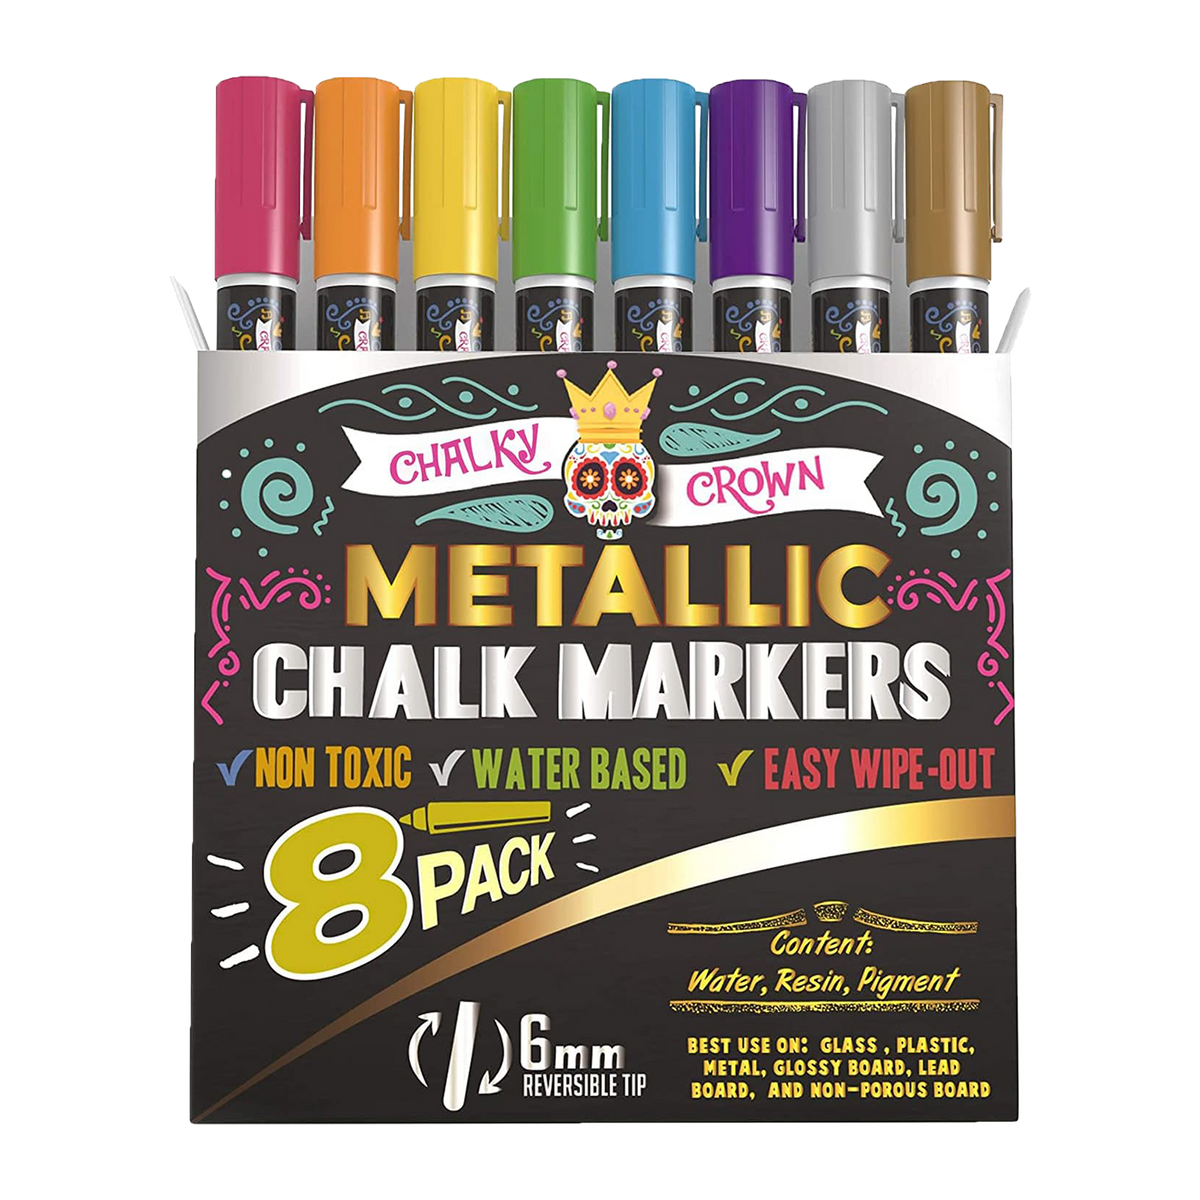  Liquid Chalk Markers Set of 8 Metallic Colors - 3mm Fine Tip  Chalkboard Markers with 24 Chalk Stickers - Erasable Pen with Reversible  Tip for Mason Jars, Windows, Glass, Labels, Whiteboards : Office Products